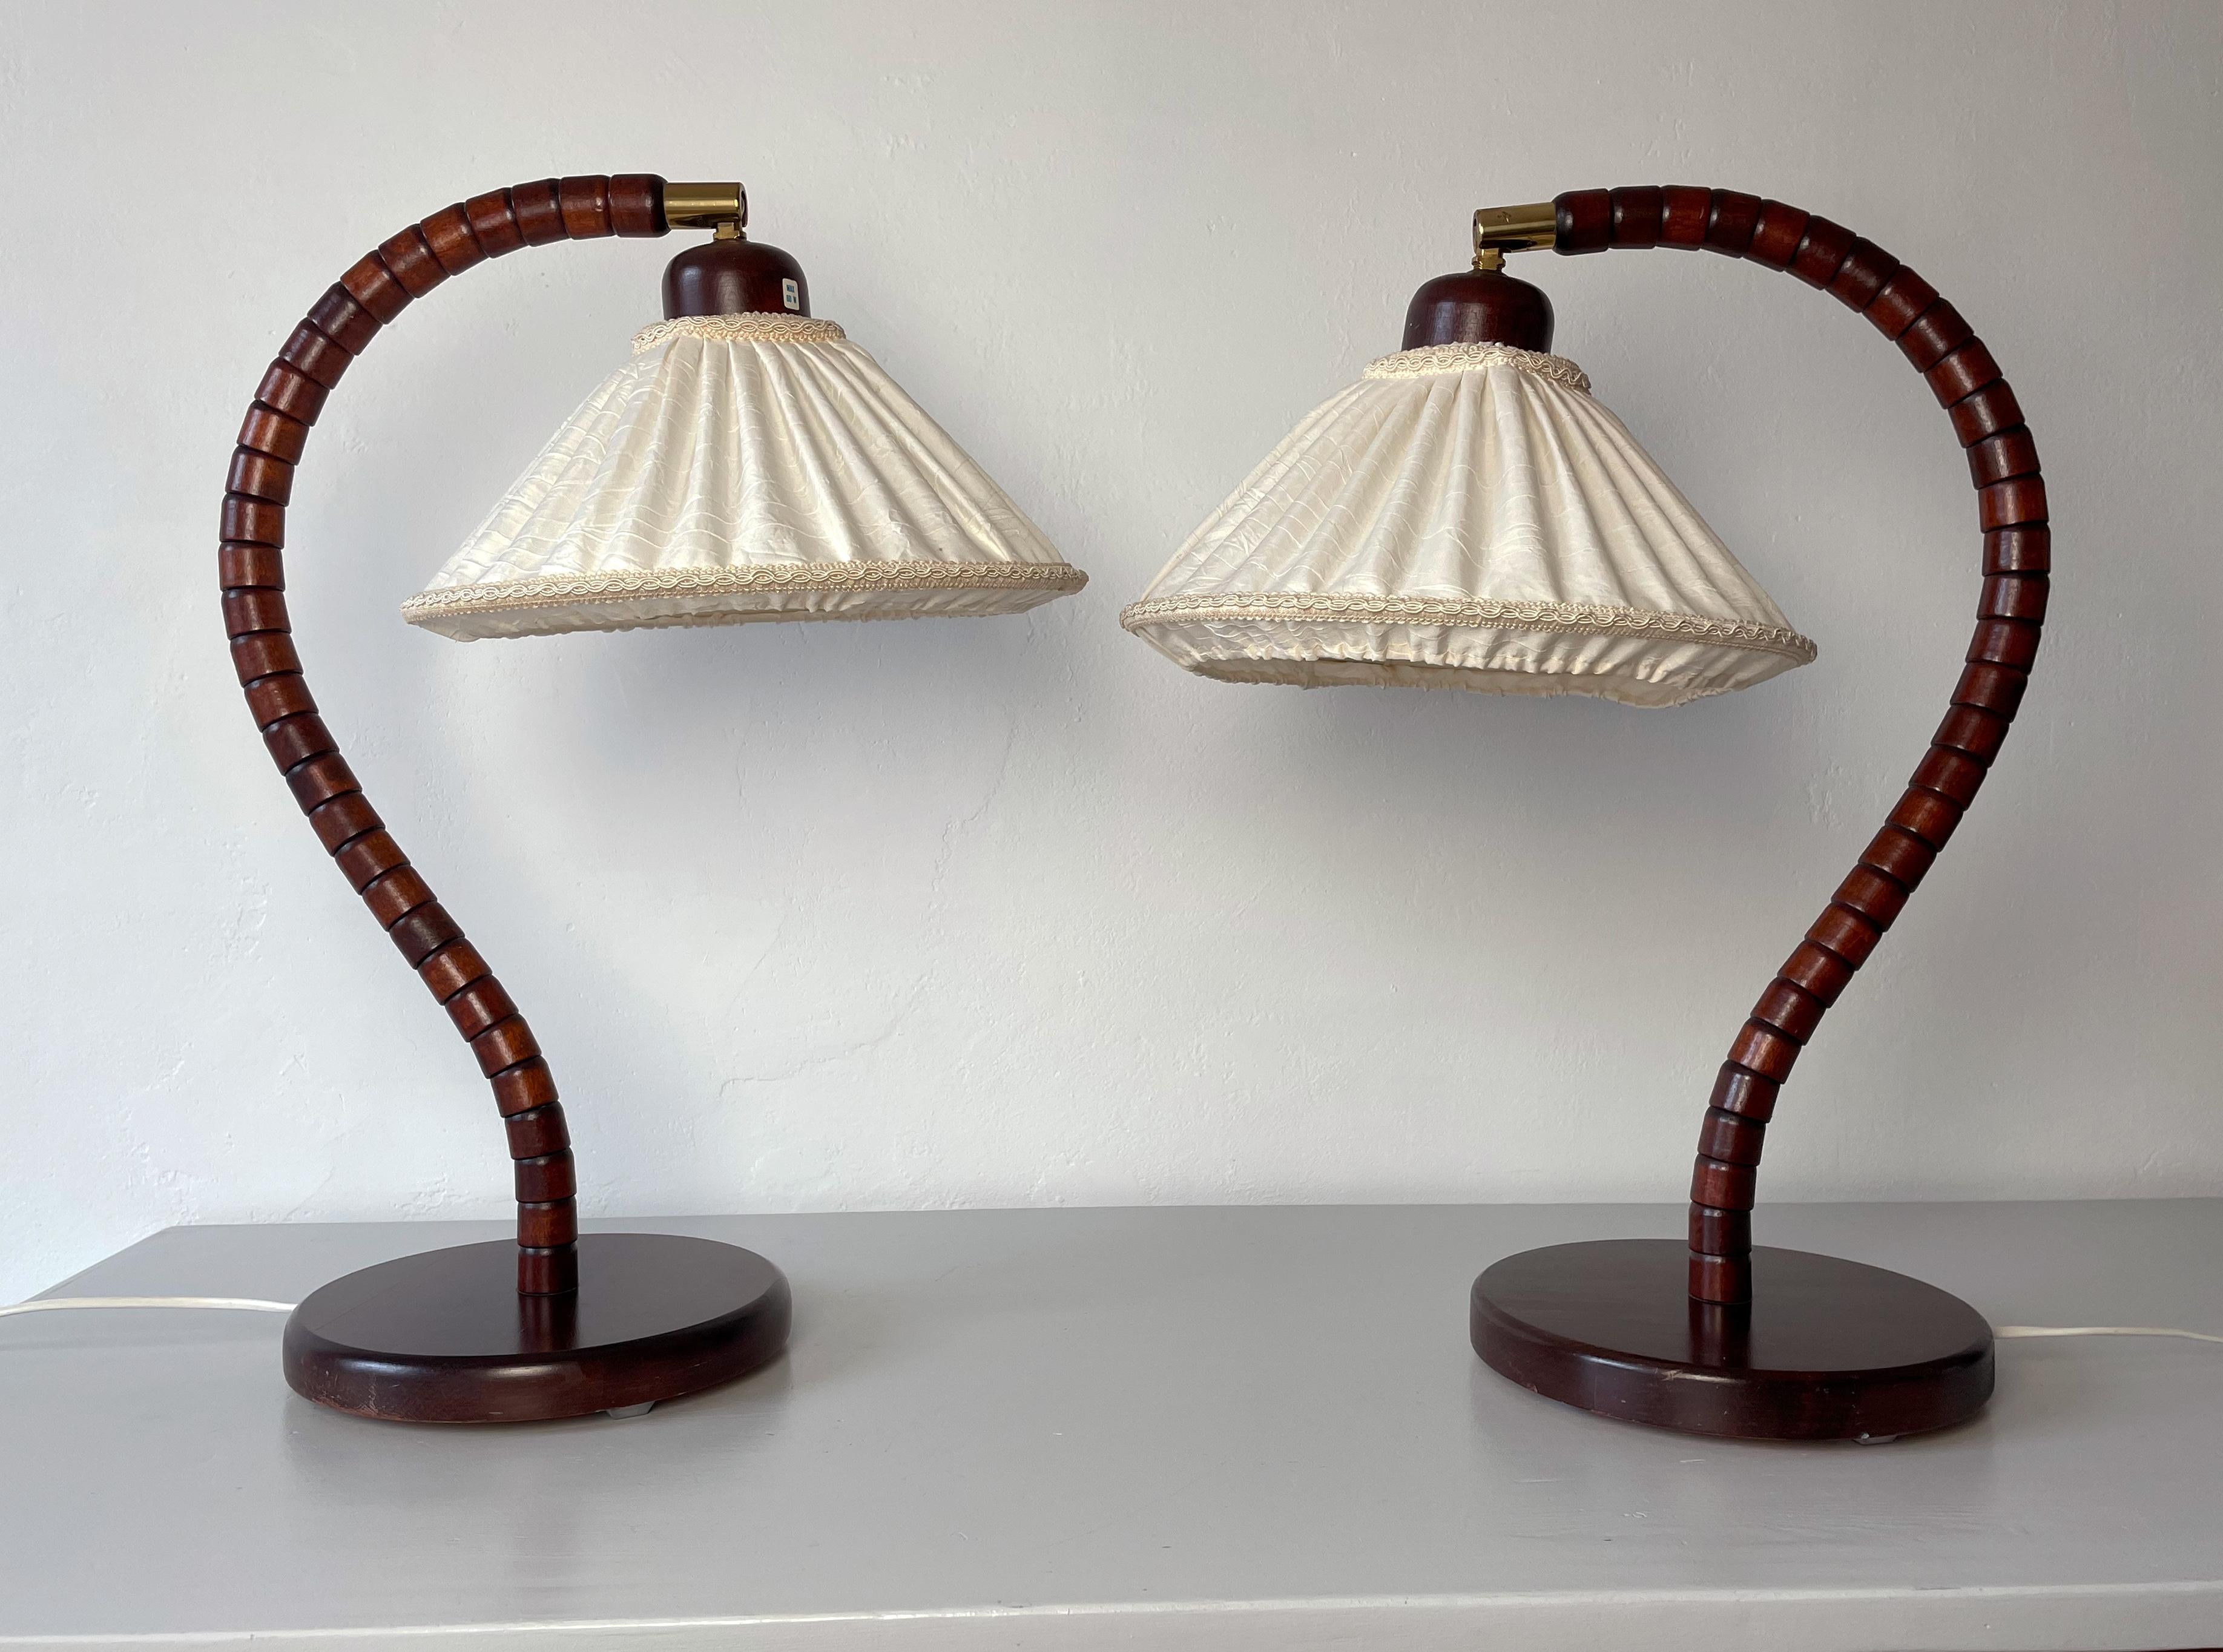 Sculptural set of table lamps produced by Markslöjd in Sweden in the 1960s. Organically shaped and made of tiers of solid beech wood in the shape of a large question mark placed on a solid circular base. Dark cherry, mahogany colored lacquer.